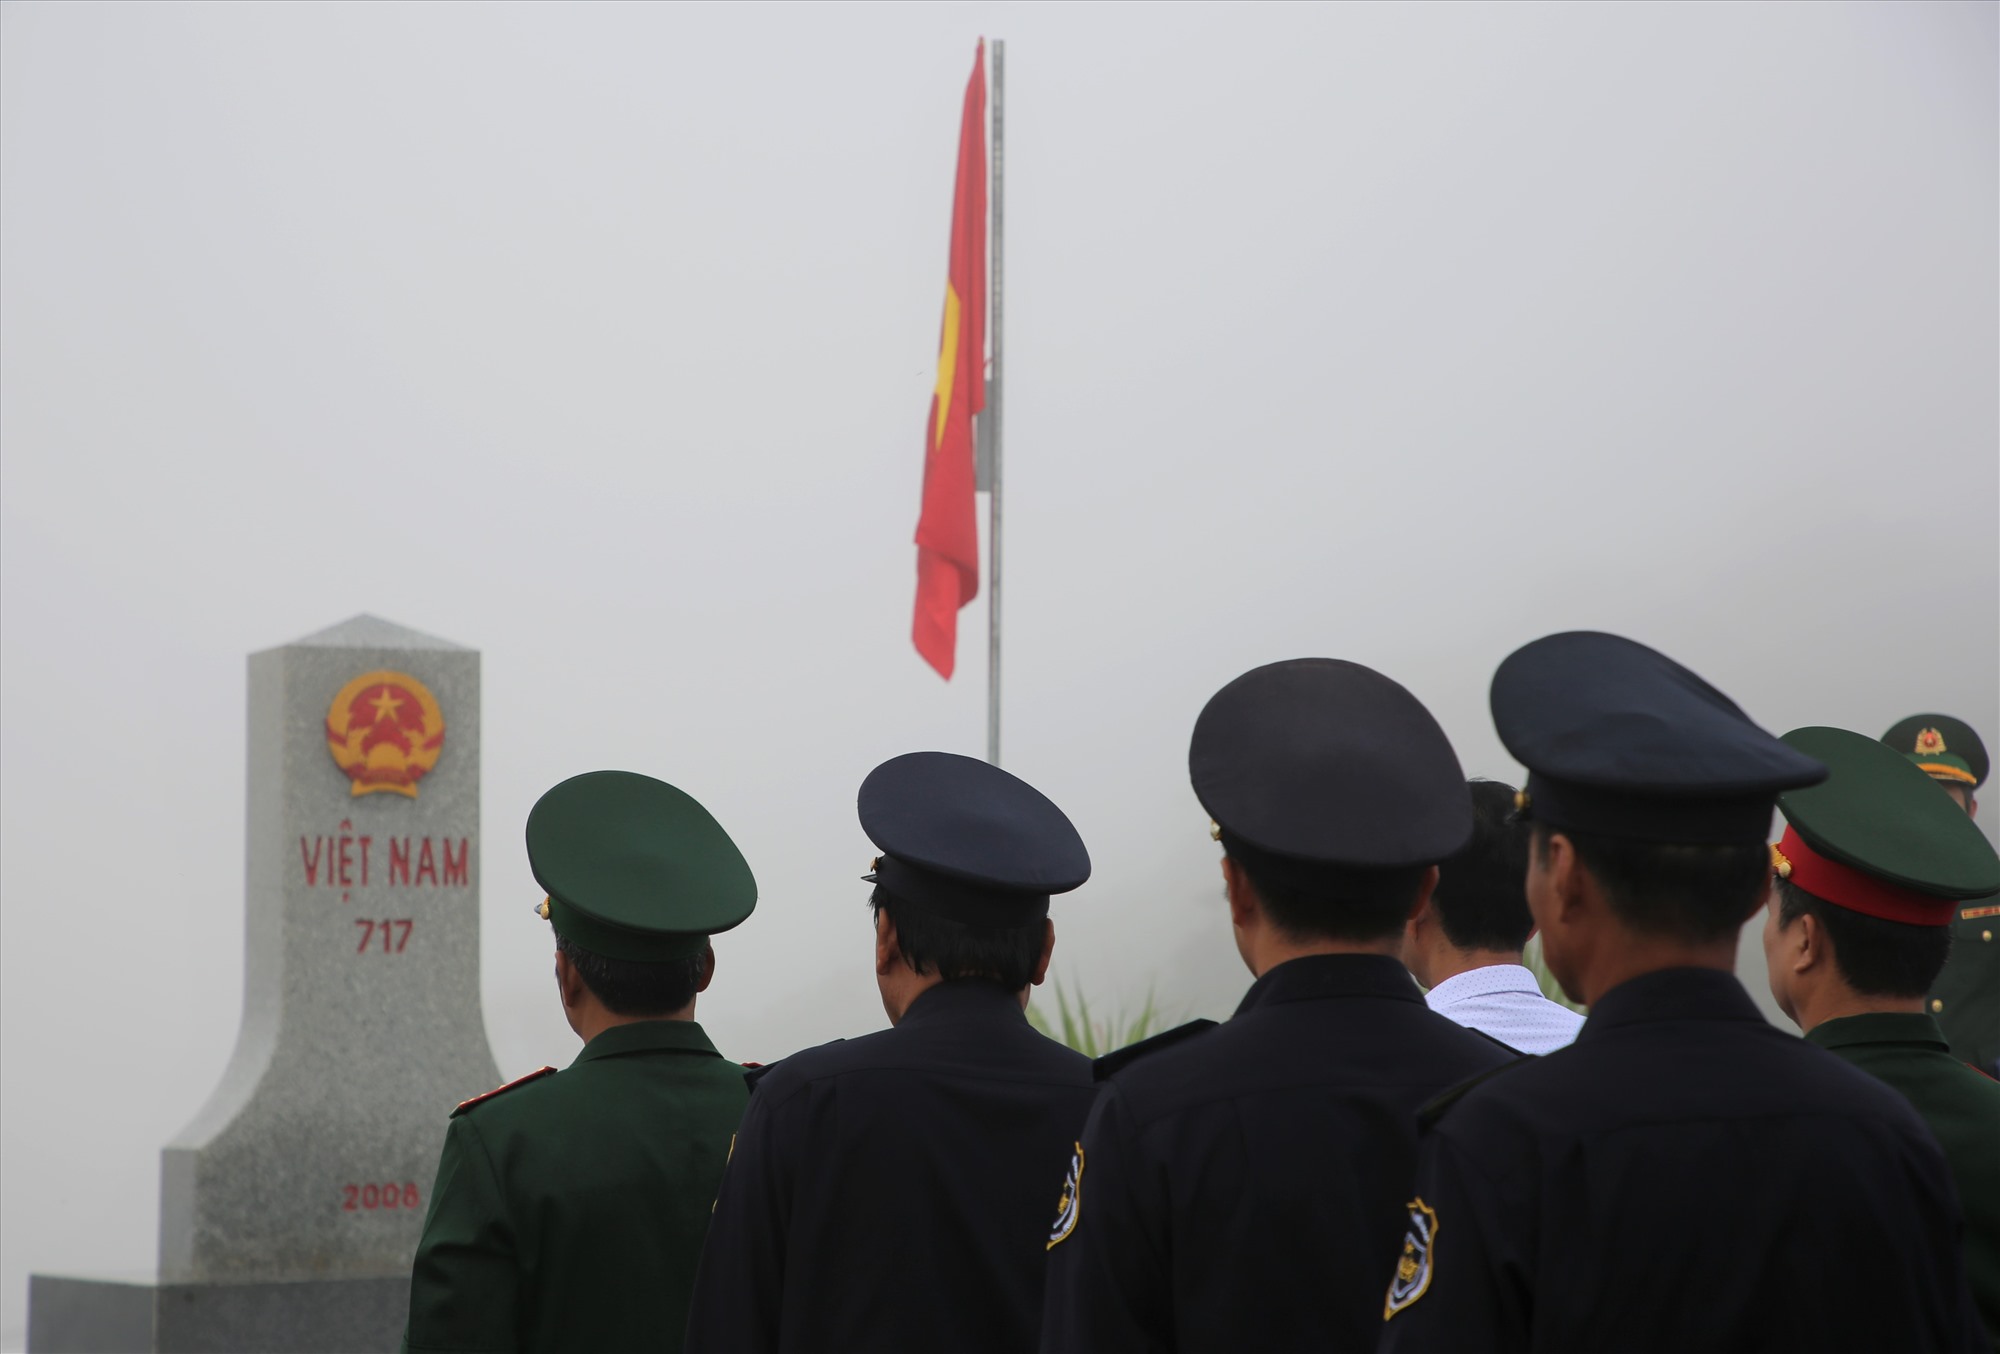 Performing theflag-raising ceremony at the border marker on Vietnam's National Day